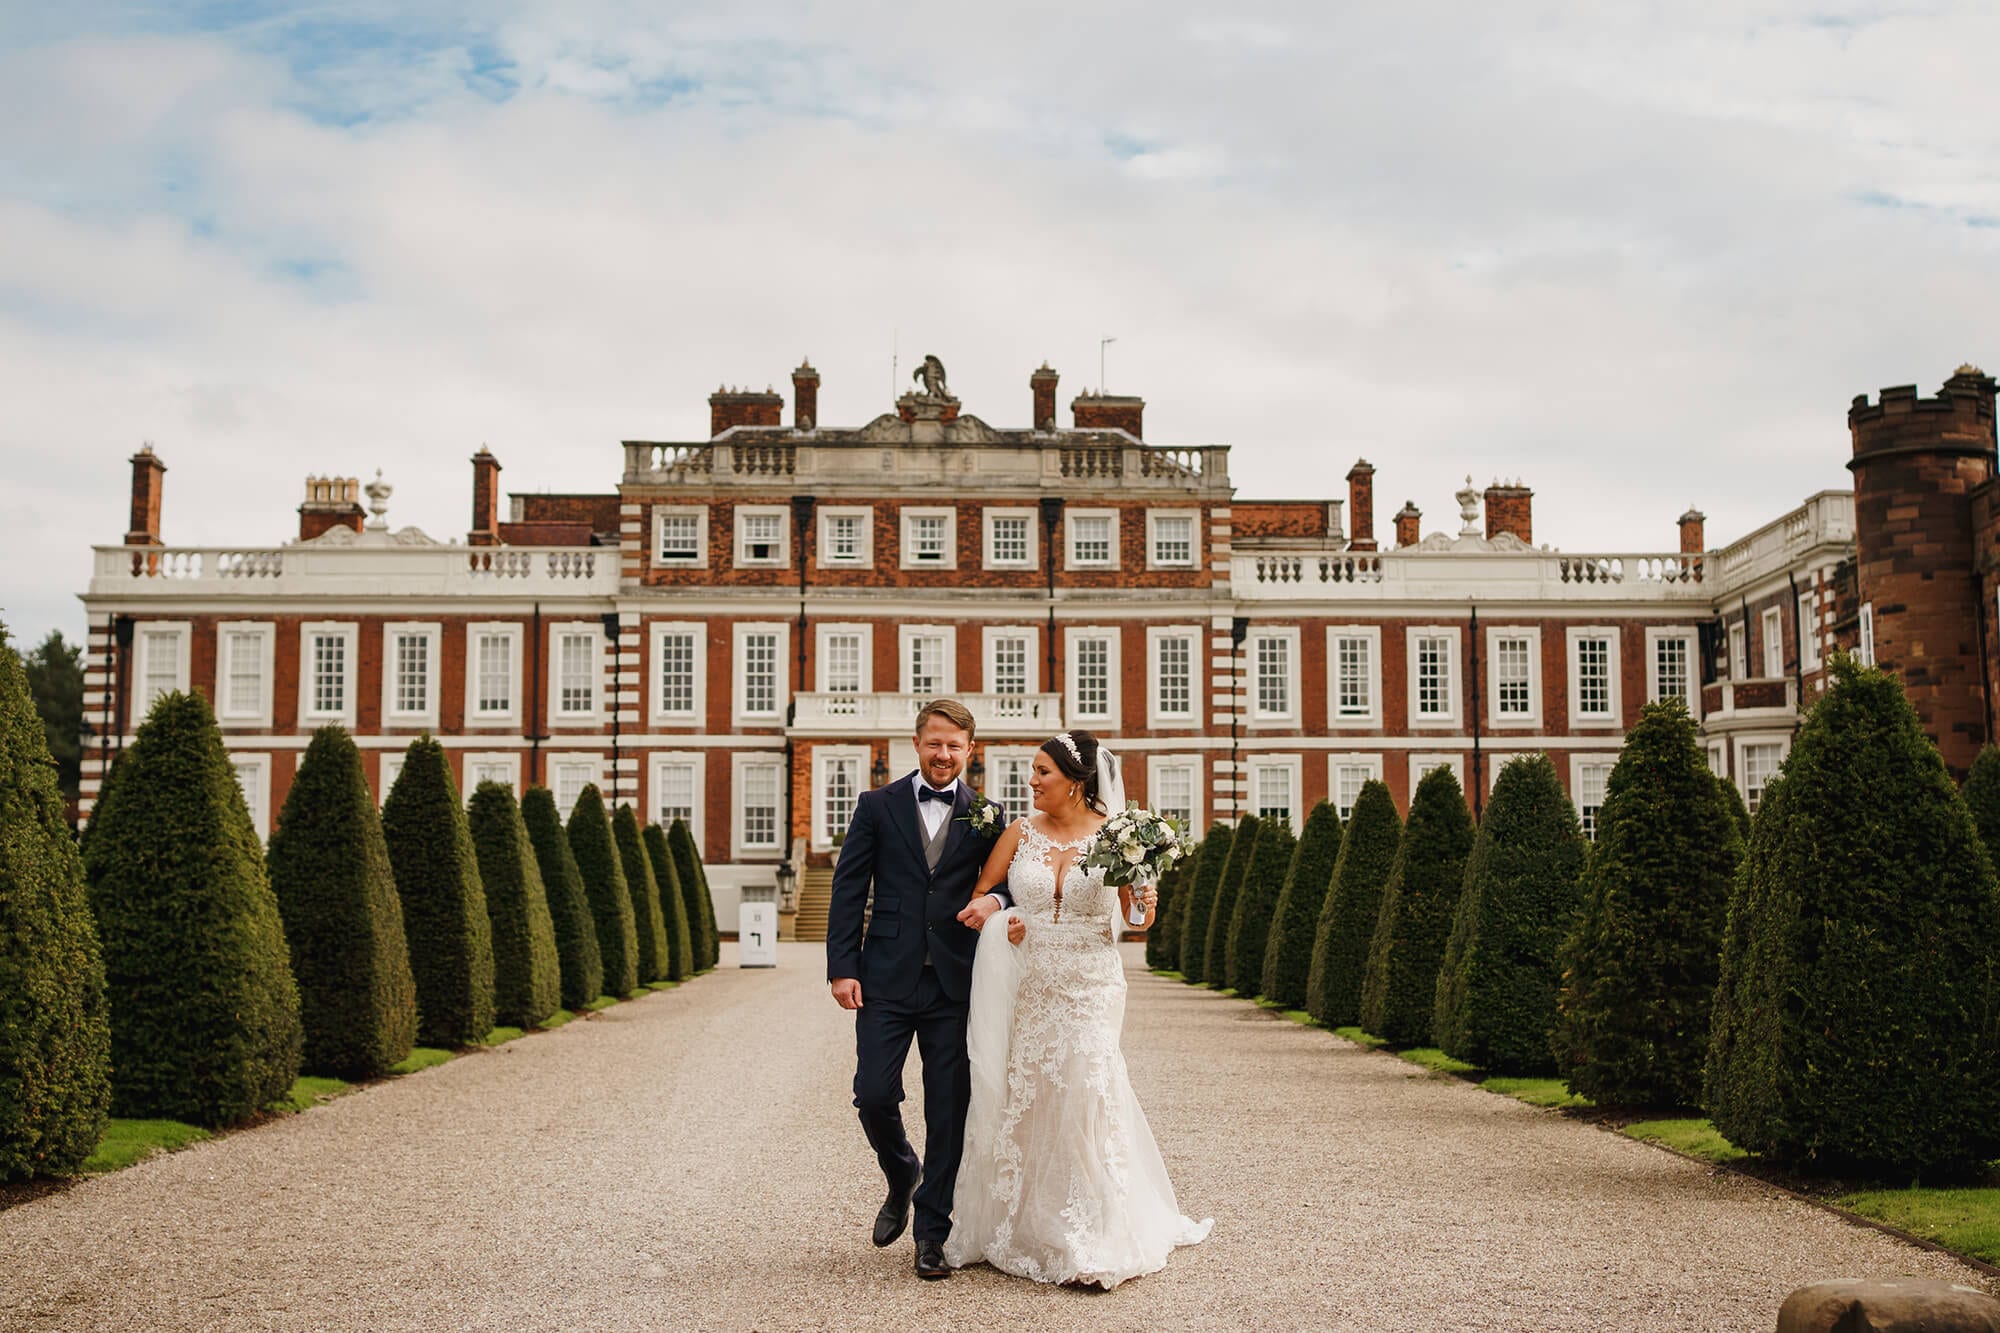 Autumn Wedding At Knowsley Hall